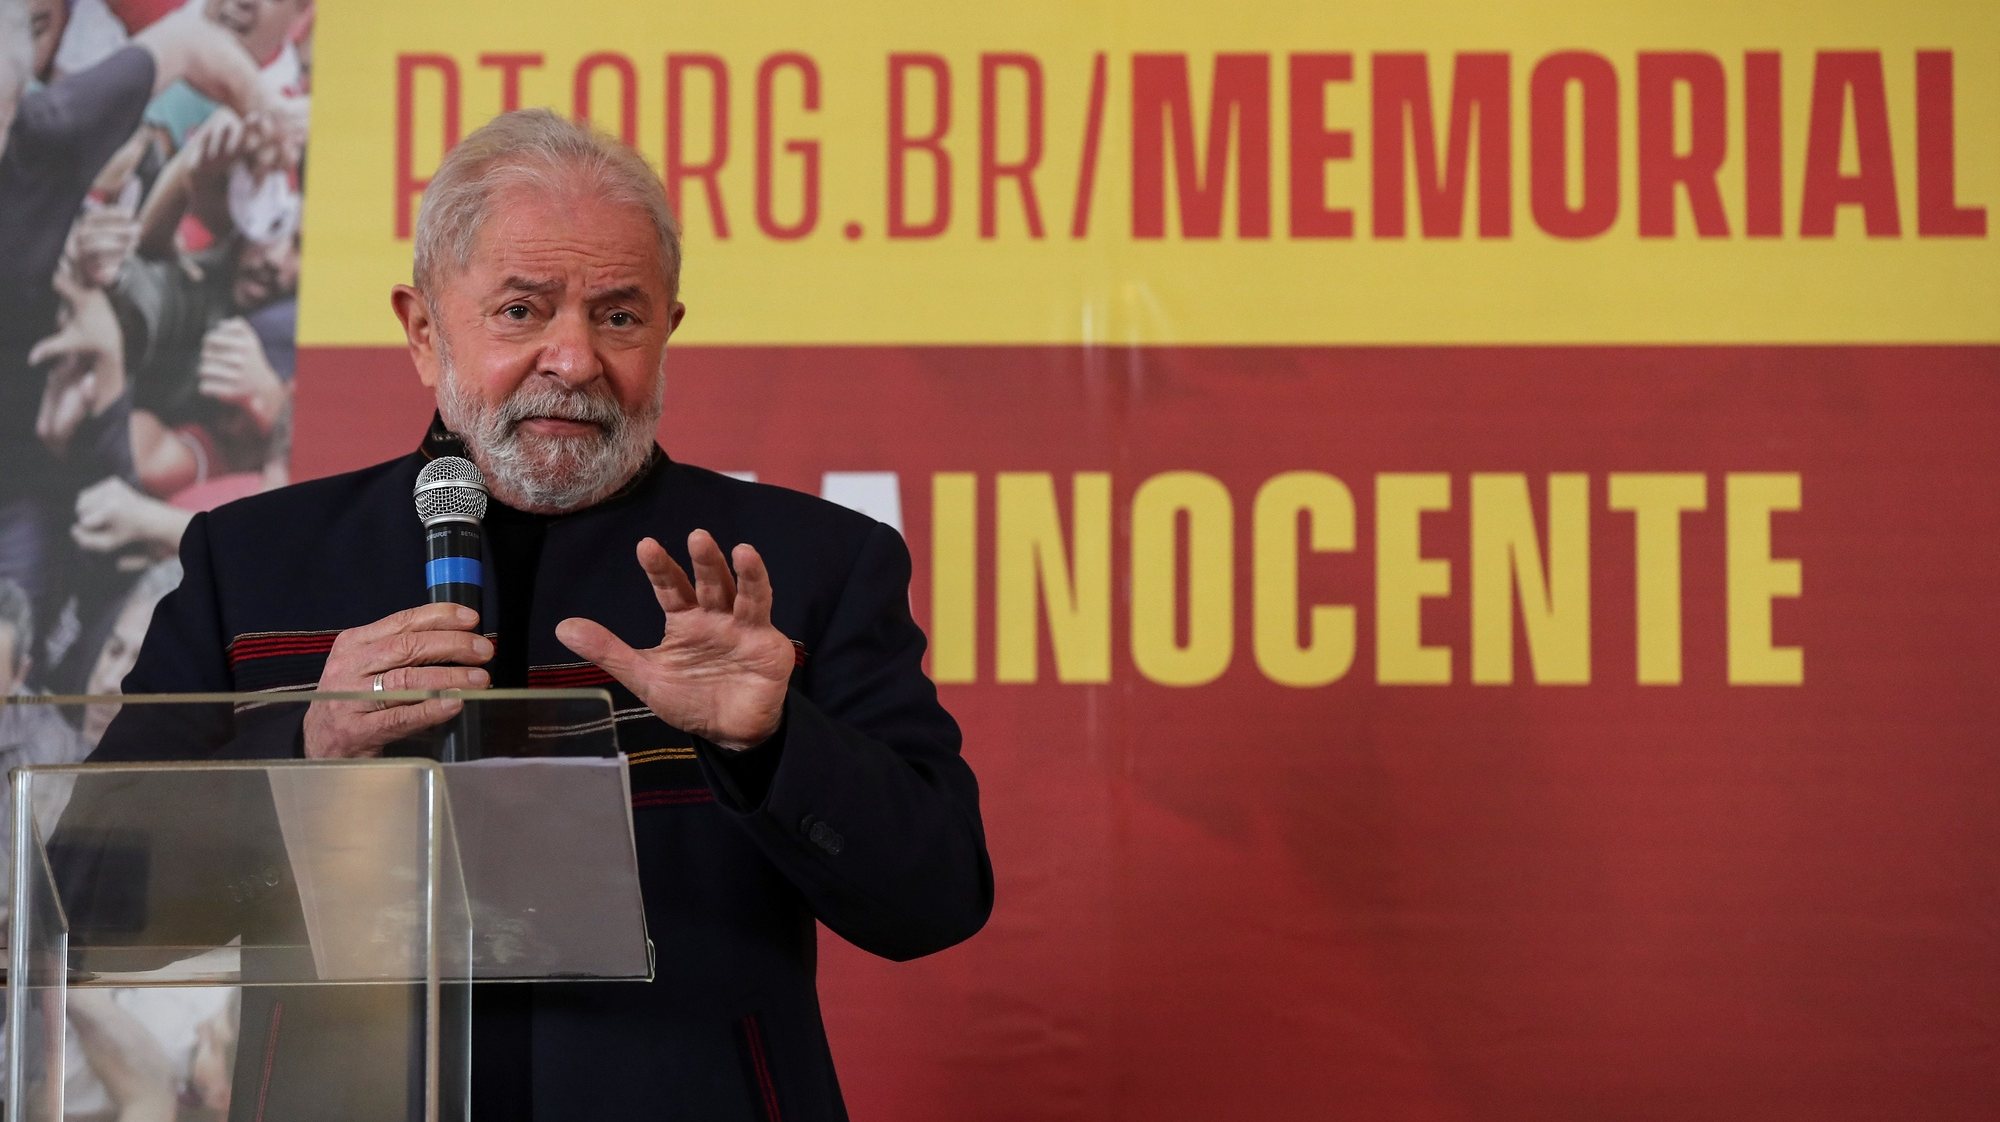 epa09411301 Former Brazilian President Luiz Inacio Lula da Silva speaks during the presentation of a book on his judicial process, in Sao Paulo, Brazil, 12 August 2021. In the book, titled &#039;Memorial of the Truth&#039; Lula details first-hand the trials he faced during the case known as Operation Lava Jato.  EPA/Sebastiao Moreira